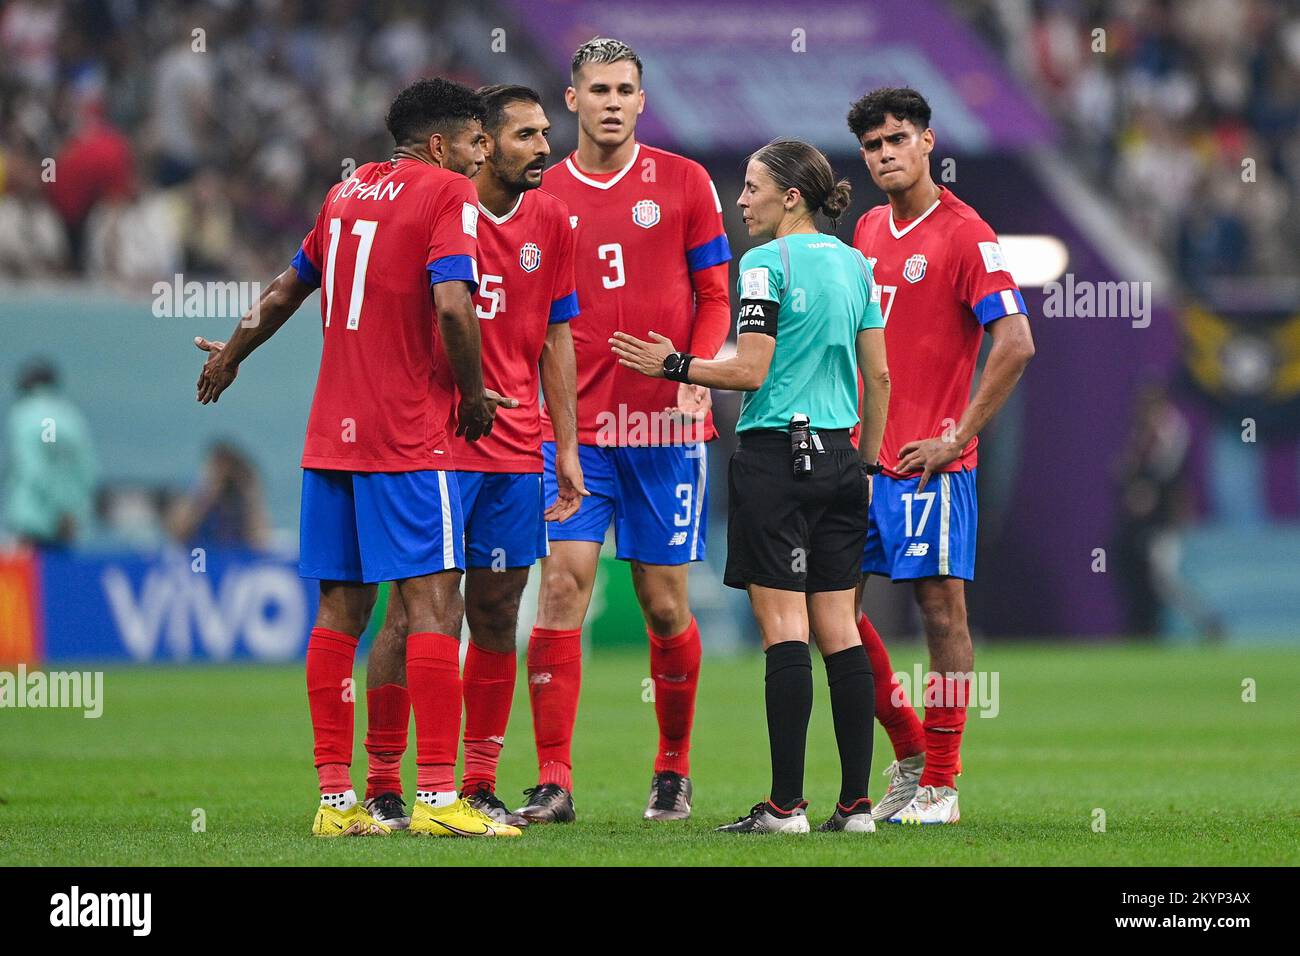 AL KHOR, QATAR - DECEMBER 1: Johan Venegas of Costa Rica, Celso Borges of Costa Rica, Juan Pablo Vargas of Costa Rica, referee Stephanie Frappart and Yeltsin Tejeda of Costa Rica during the Group E - FIFA World Cup Qatar 2022 match between Costa Rica and Germany at the Al Bayt Stadium on December 1, 2022 in Al Khor, Qatar (Photo by Pablo Morano/BSR Agency) Stock Photo